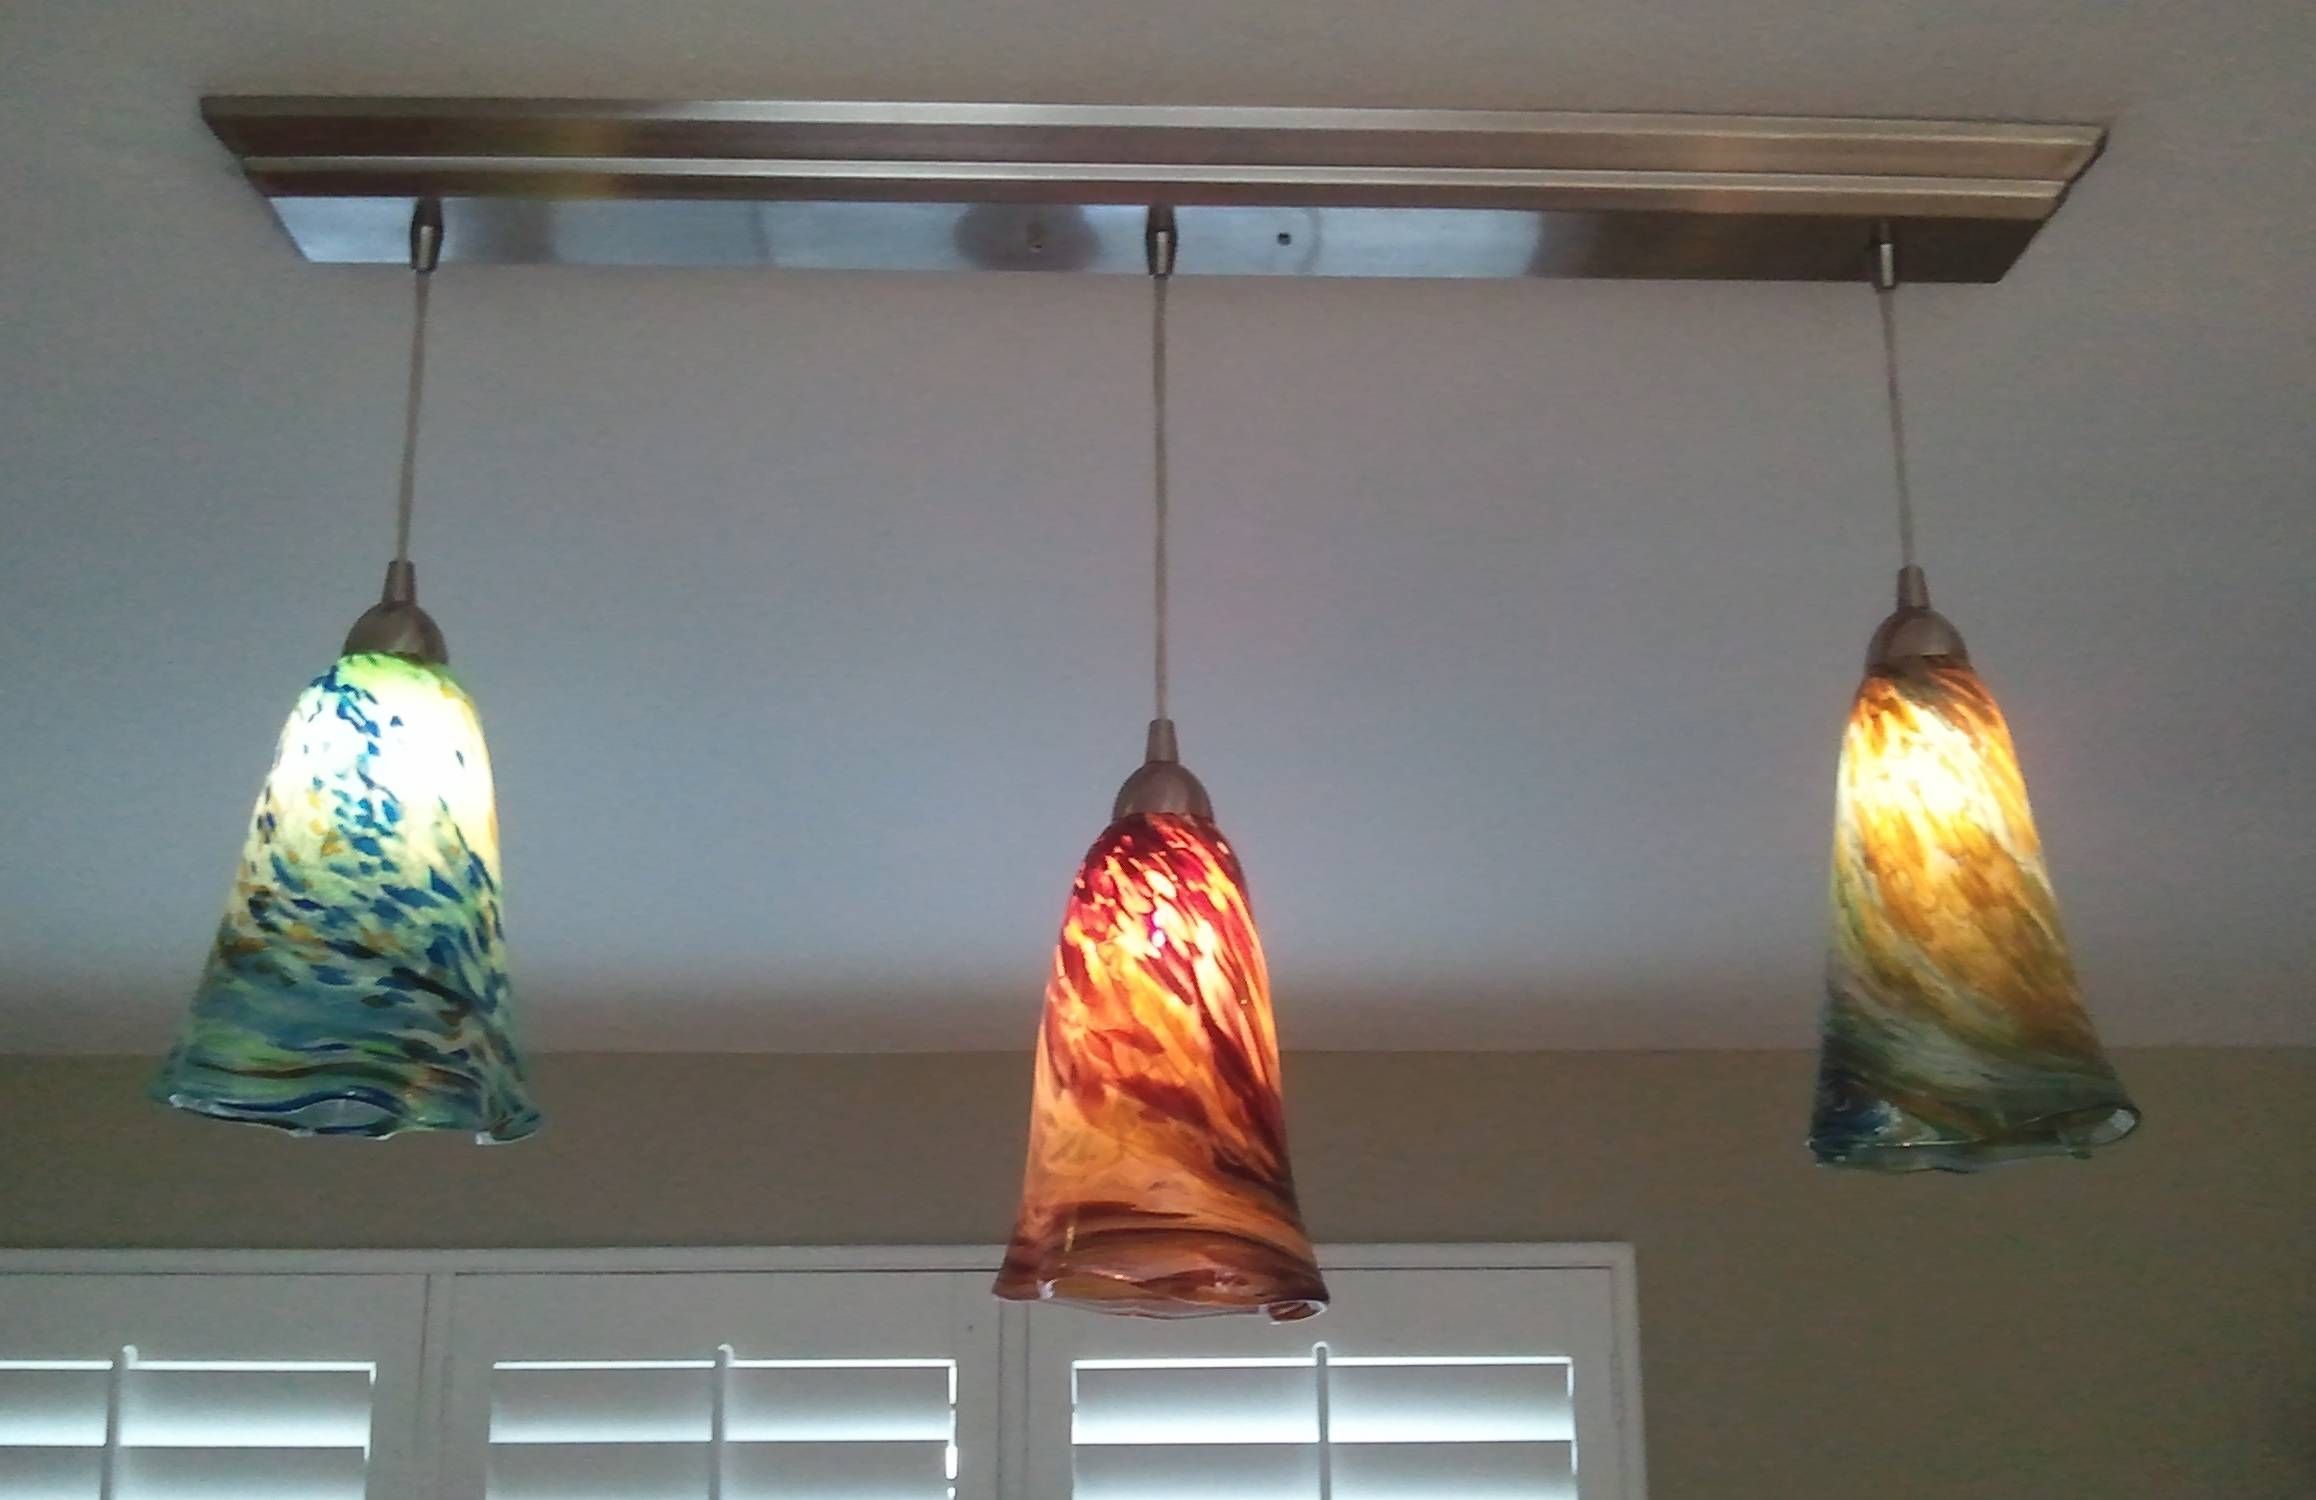 replacement globes for kitchen pendant light